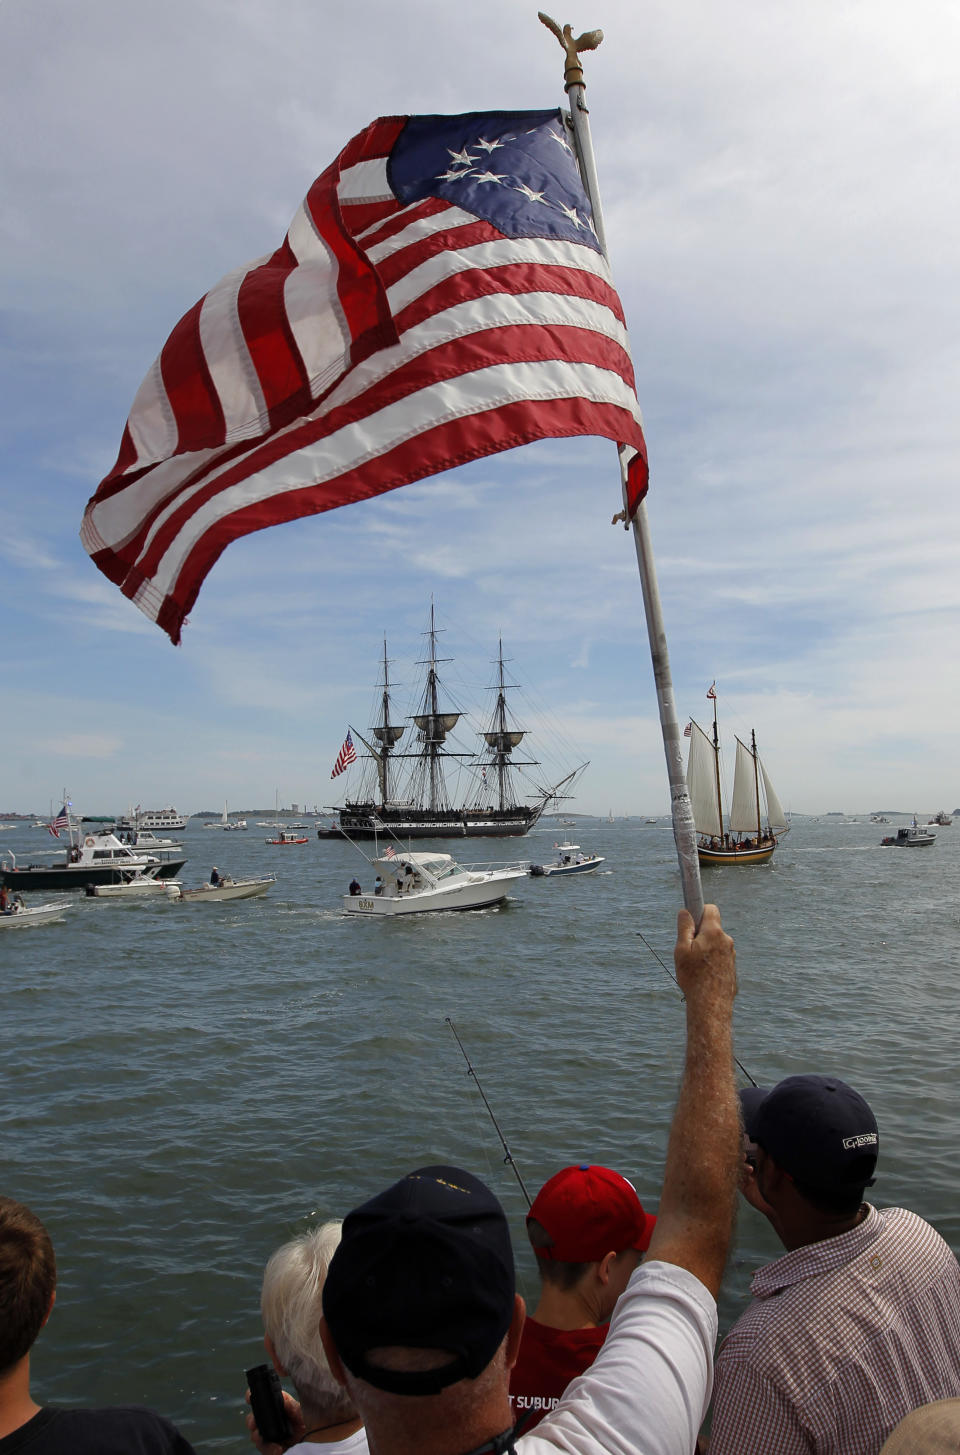 An onlooker waves a colonial era flag as the USS Constitution passes through Boston Harbor in Boston, Sunday, Aug. 19, 2012. The USS Constitution, the U.S. Navy's oldest commissioned war ship, sailed under her own power during the event Sunday for the first time since 1997. The sail was held to commemorate the 200th anniversary of the ship's victory over HMS Guerriere in the War of 1812. (AP Photo/Steven Senne)